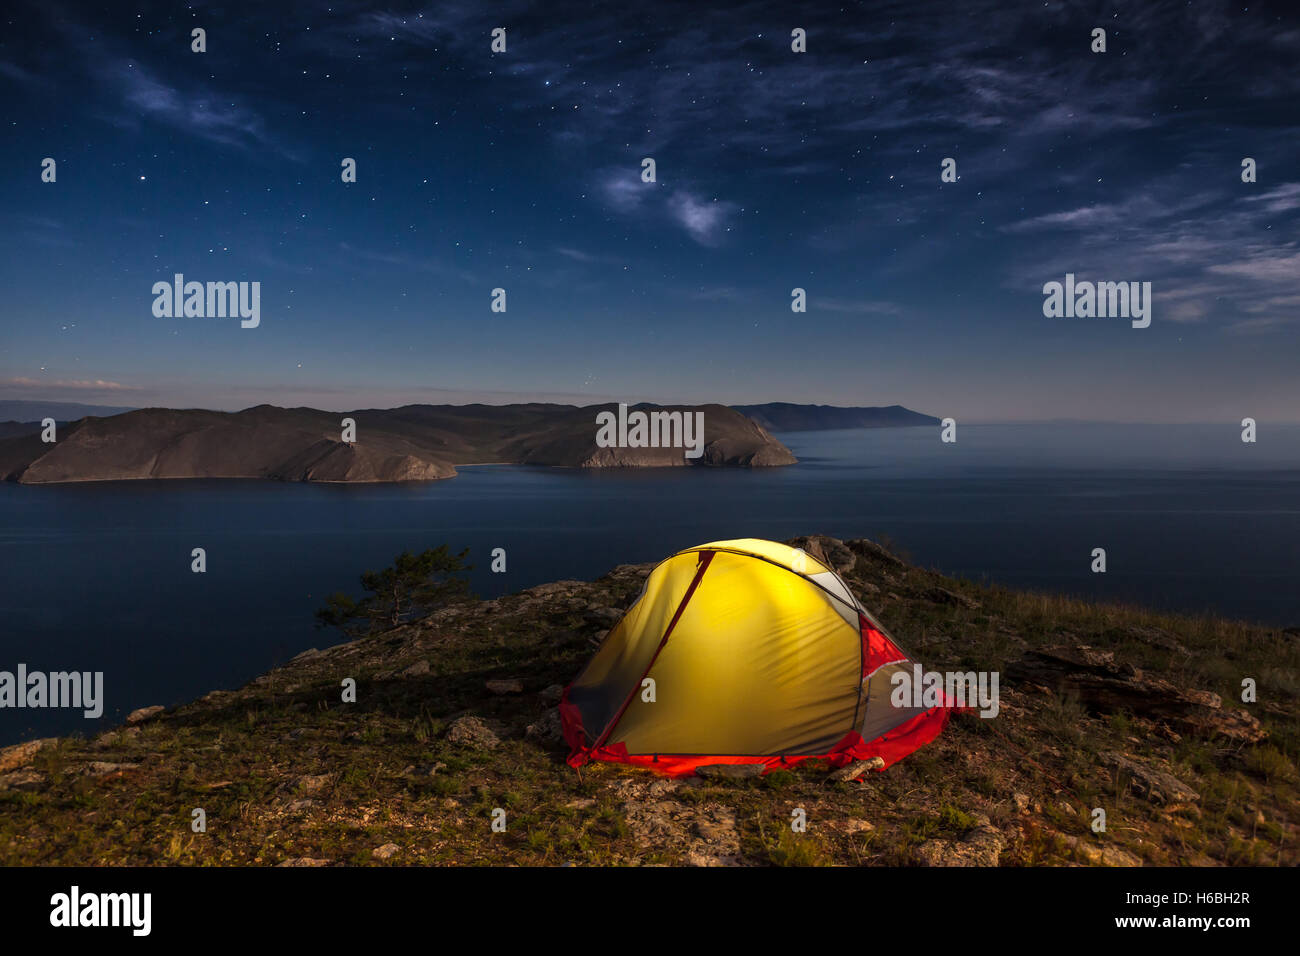 Tent against mountain at night Stock Photo